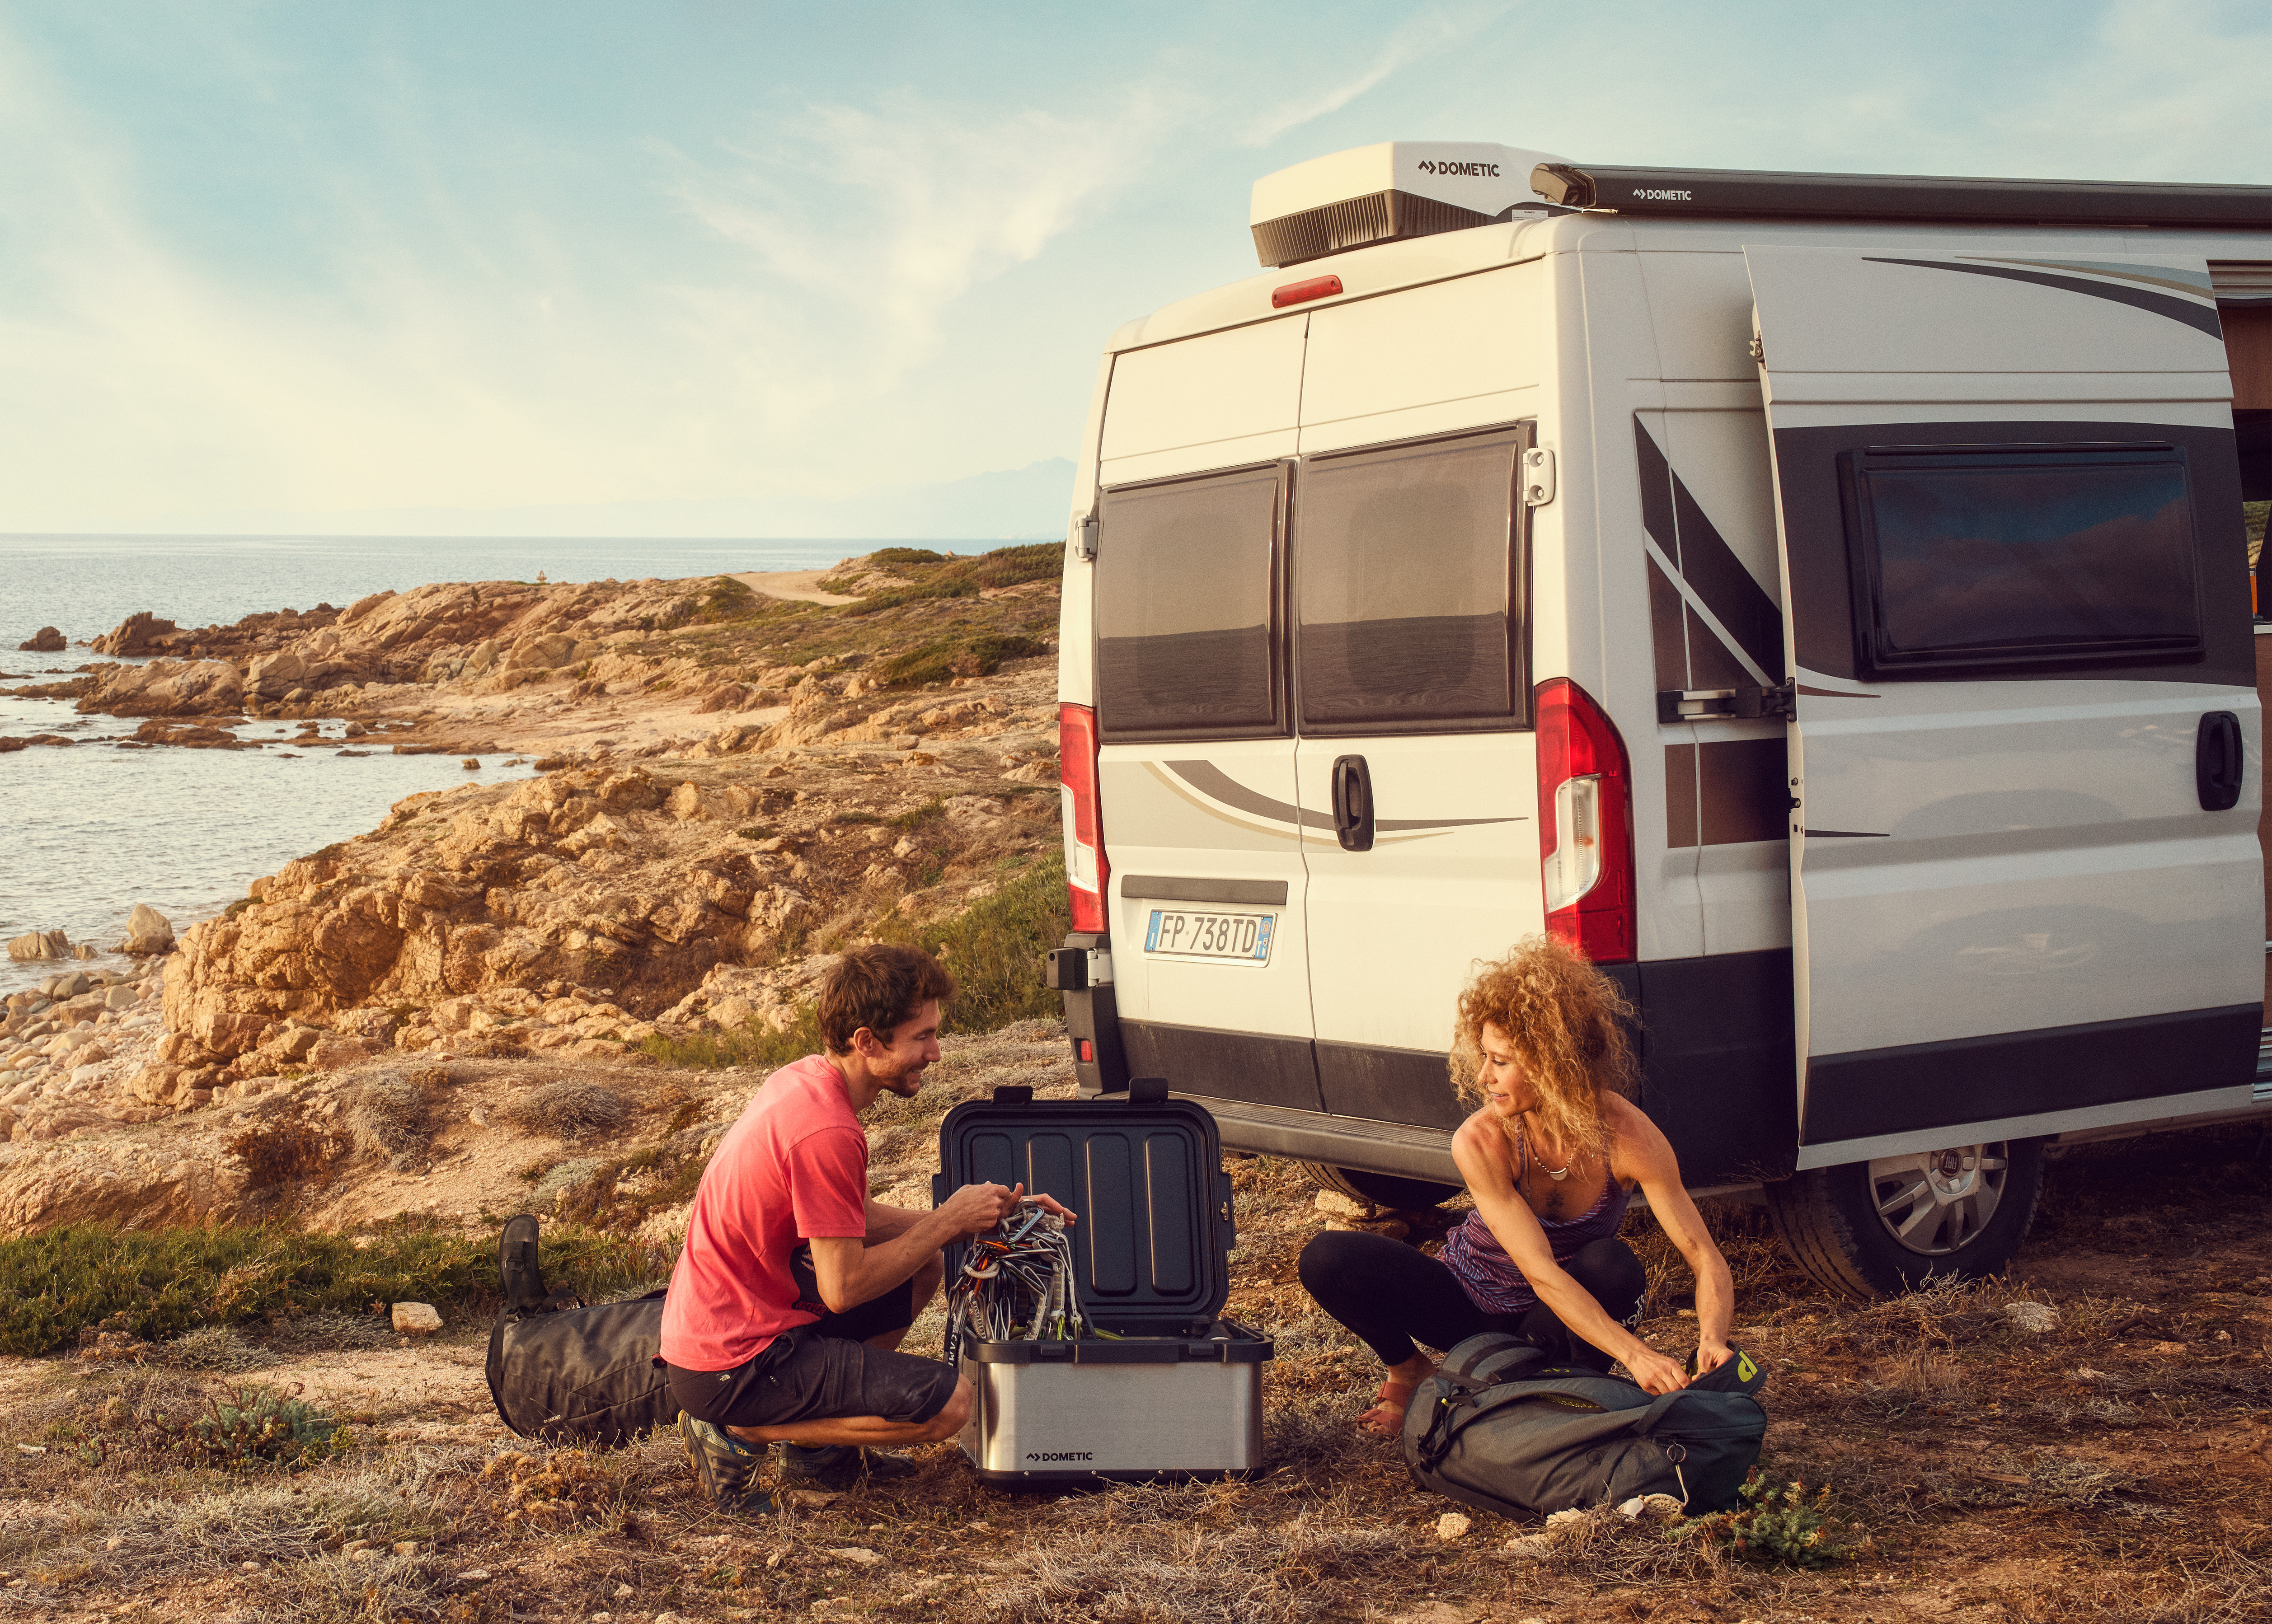 Outdoor Gear Designed for Vanlife